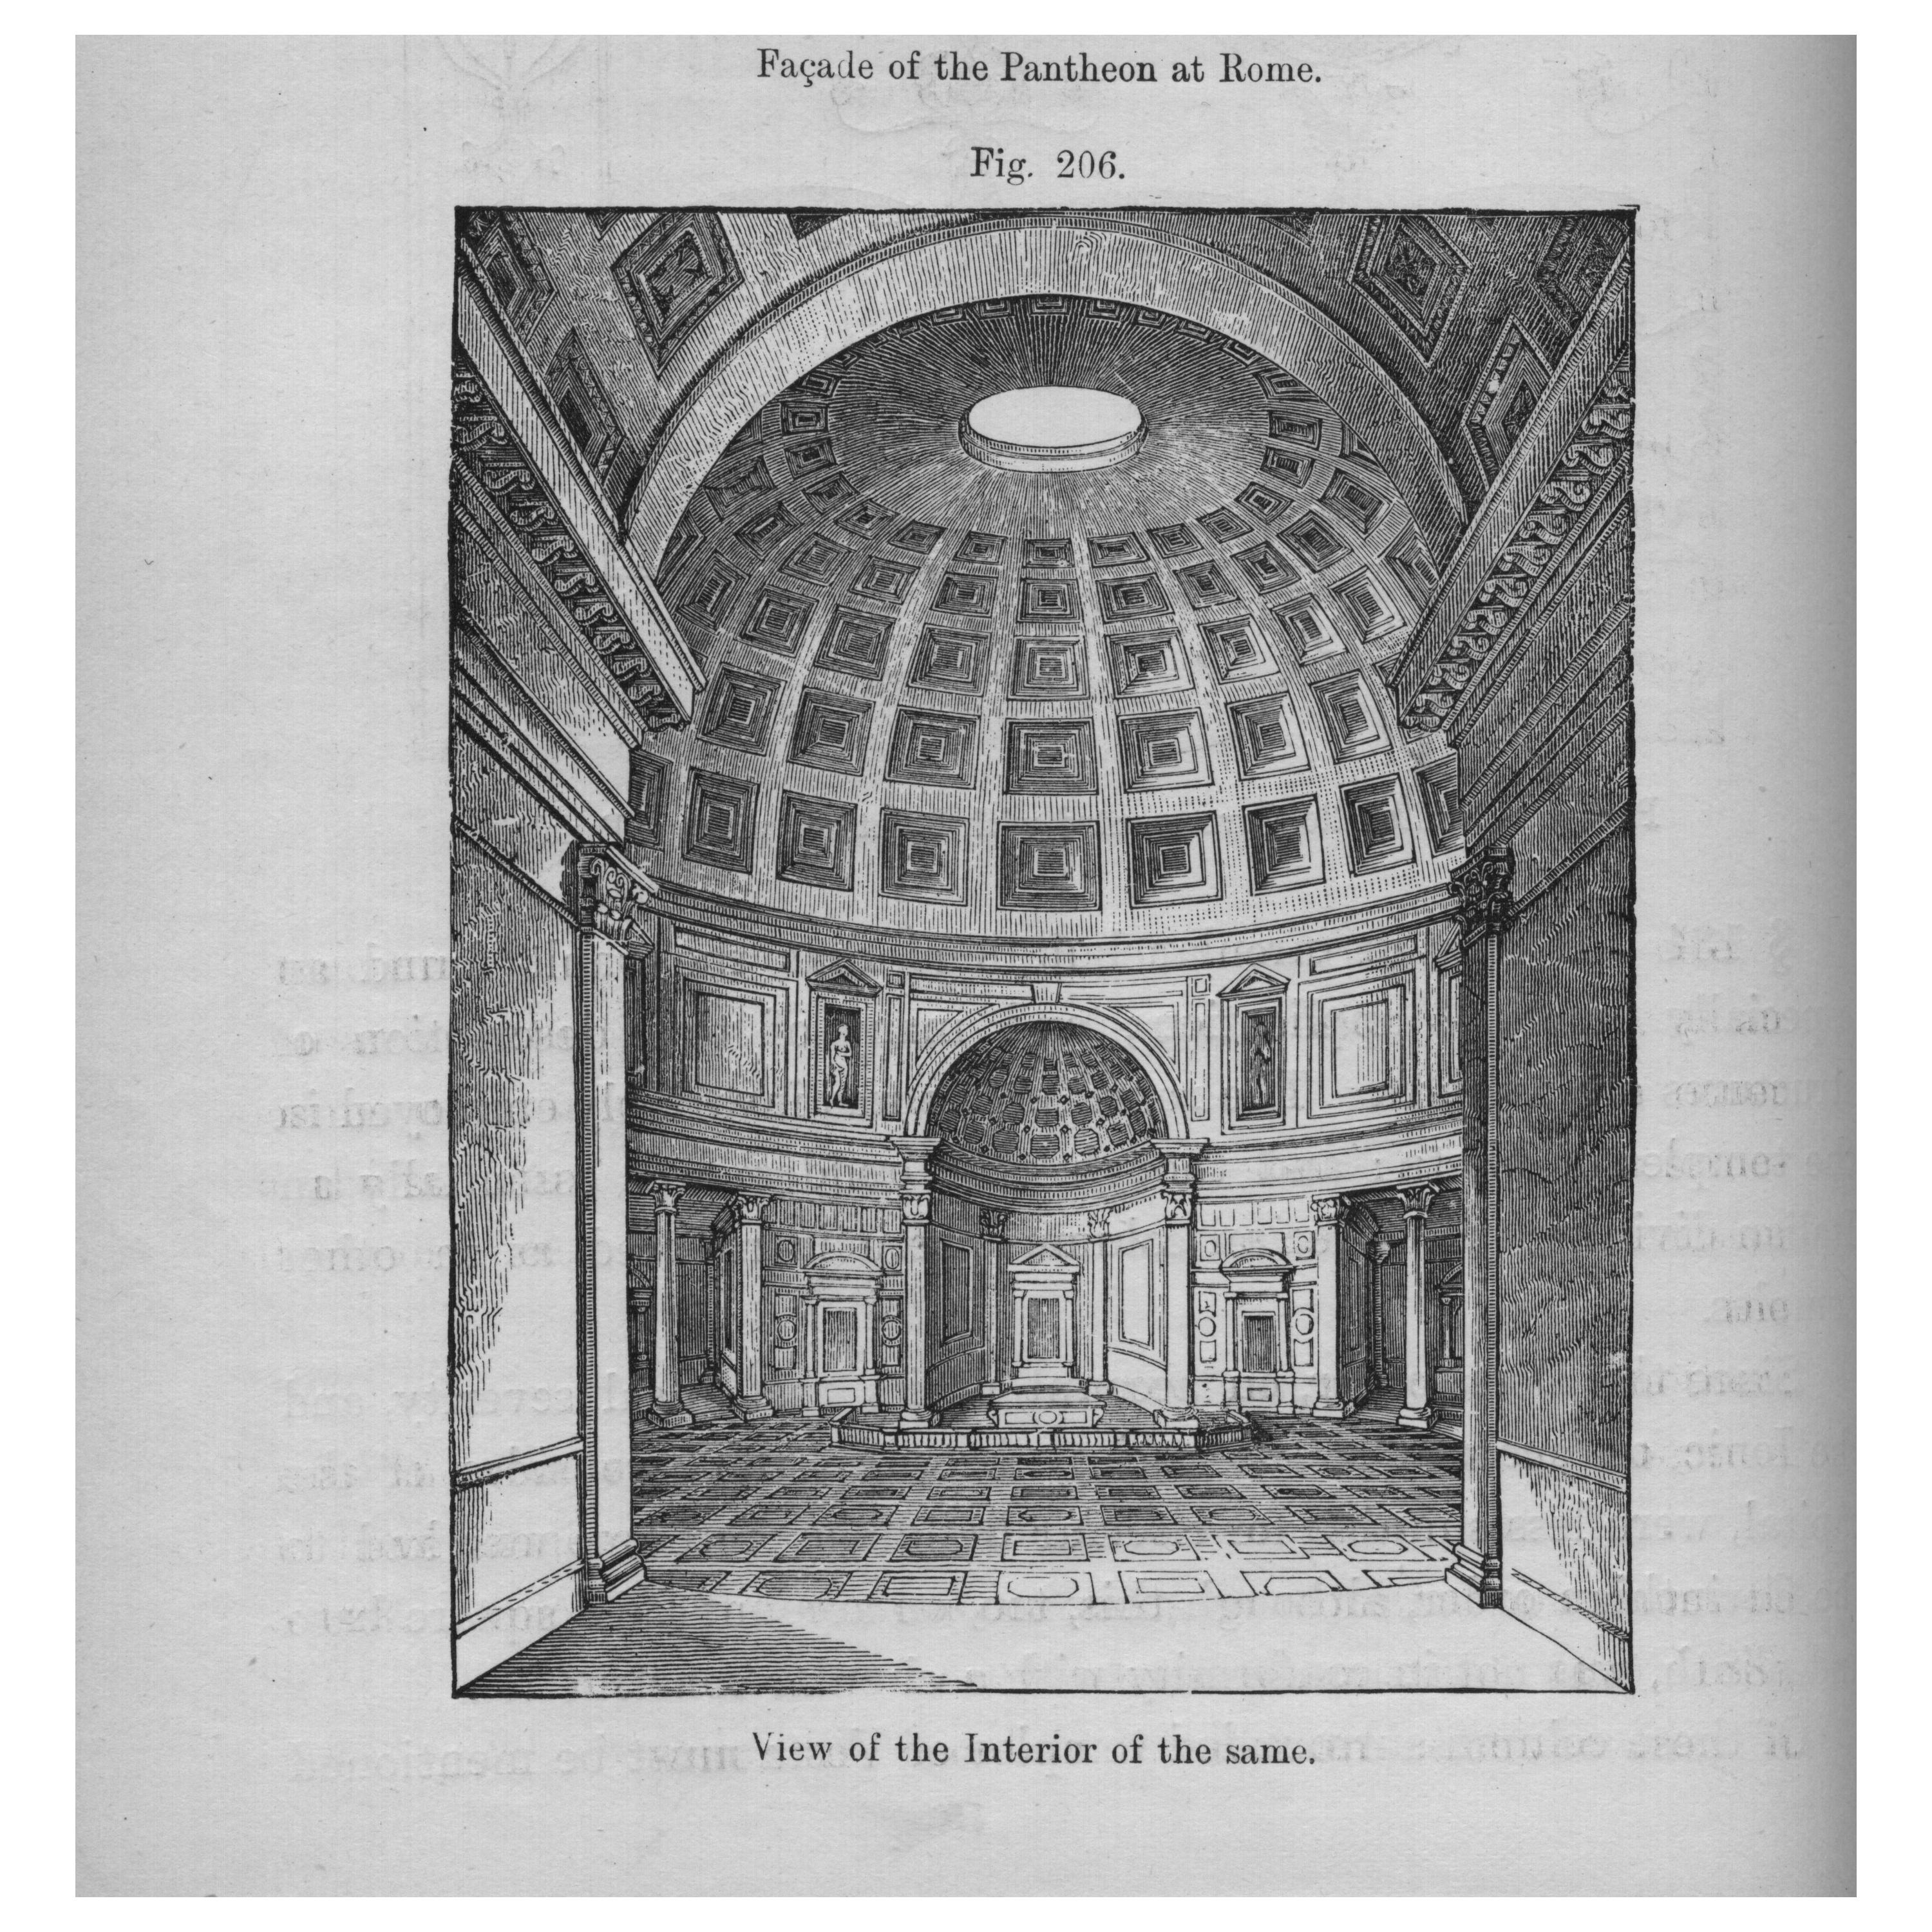 An architectural rendering of the apse from the Pantheon at Rome, with its coffered panel ceiling and intricate details, inspired the apse located at the north end of Stanley Field Hall. From A Handbook of Architectural Styles, 1809.